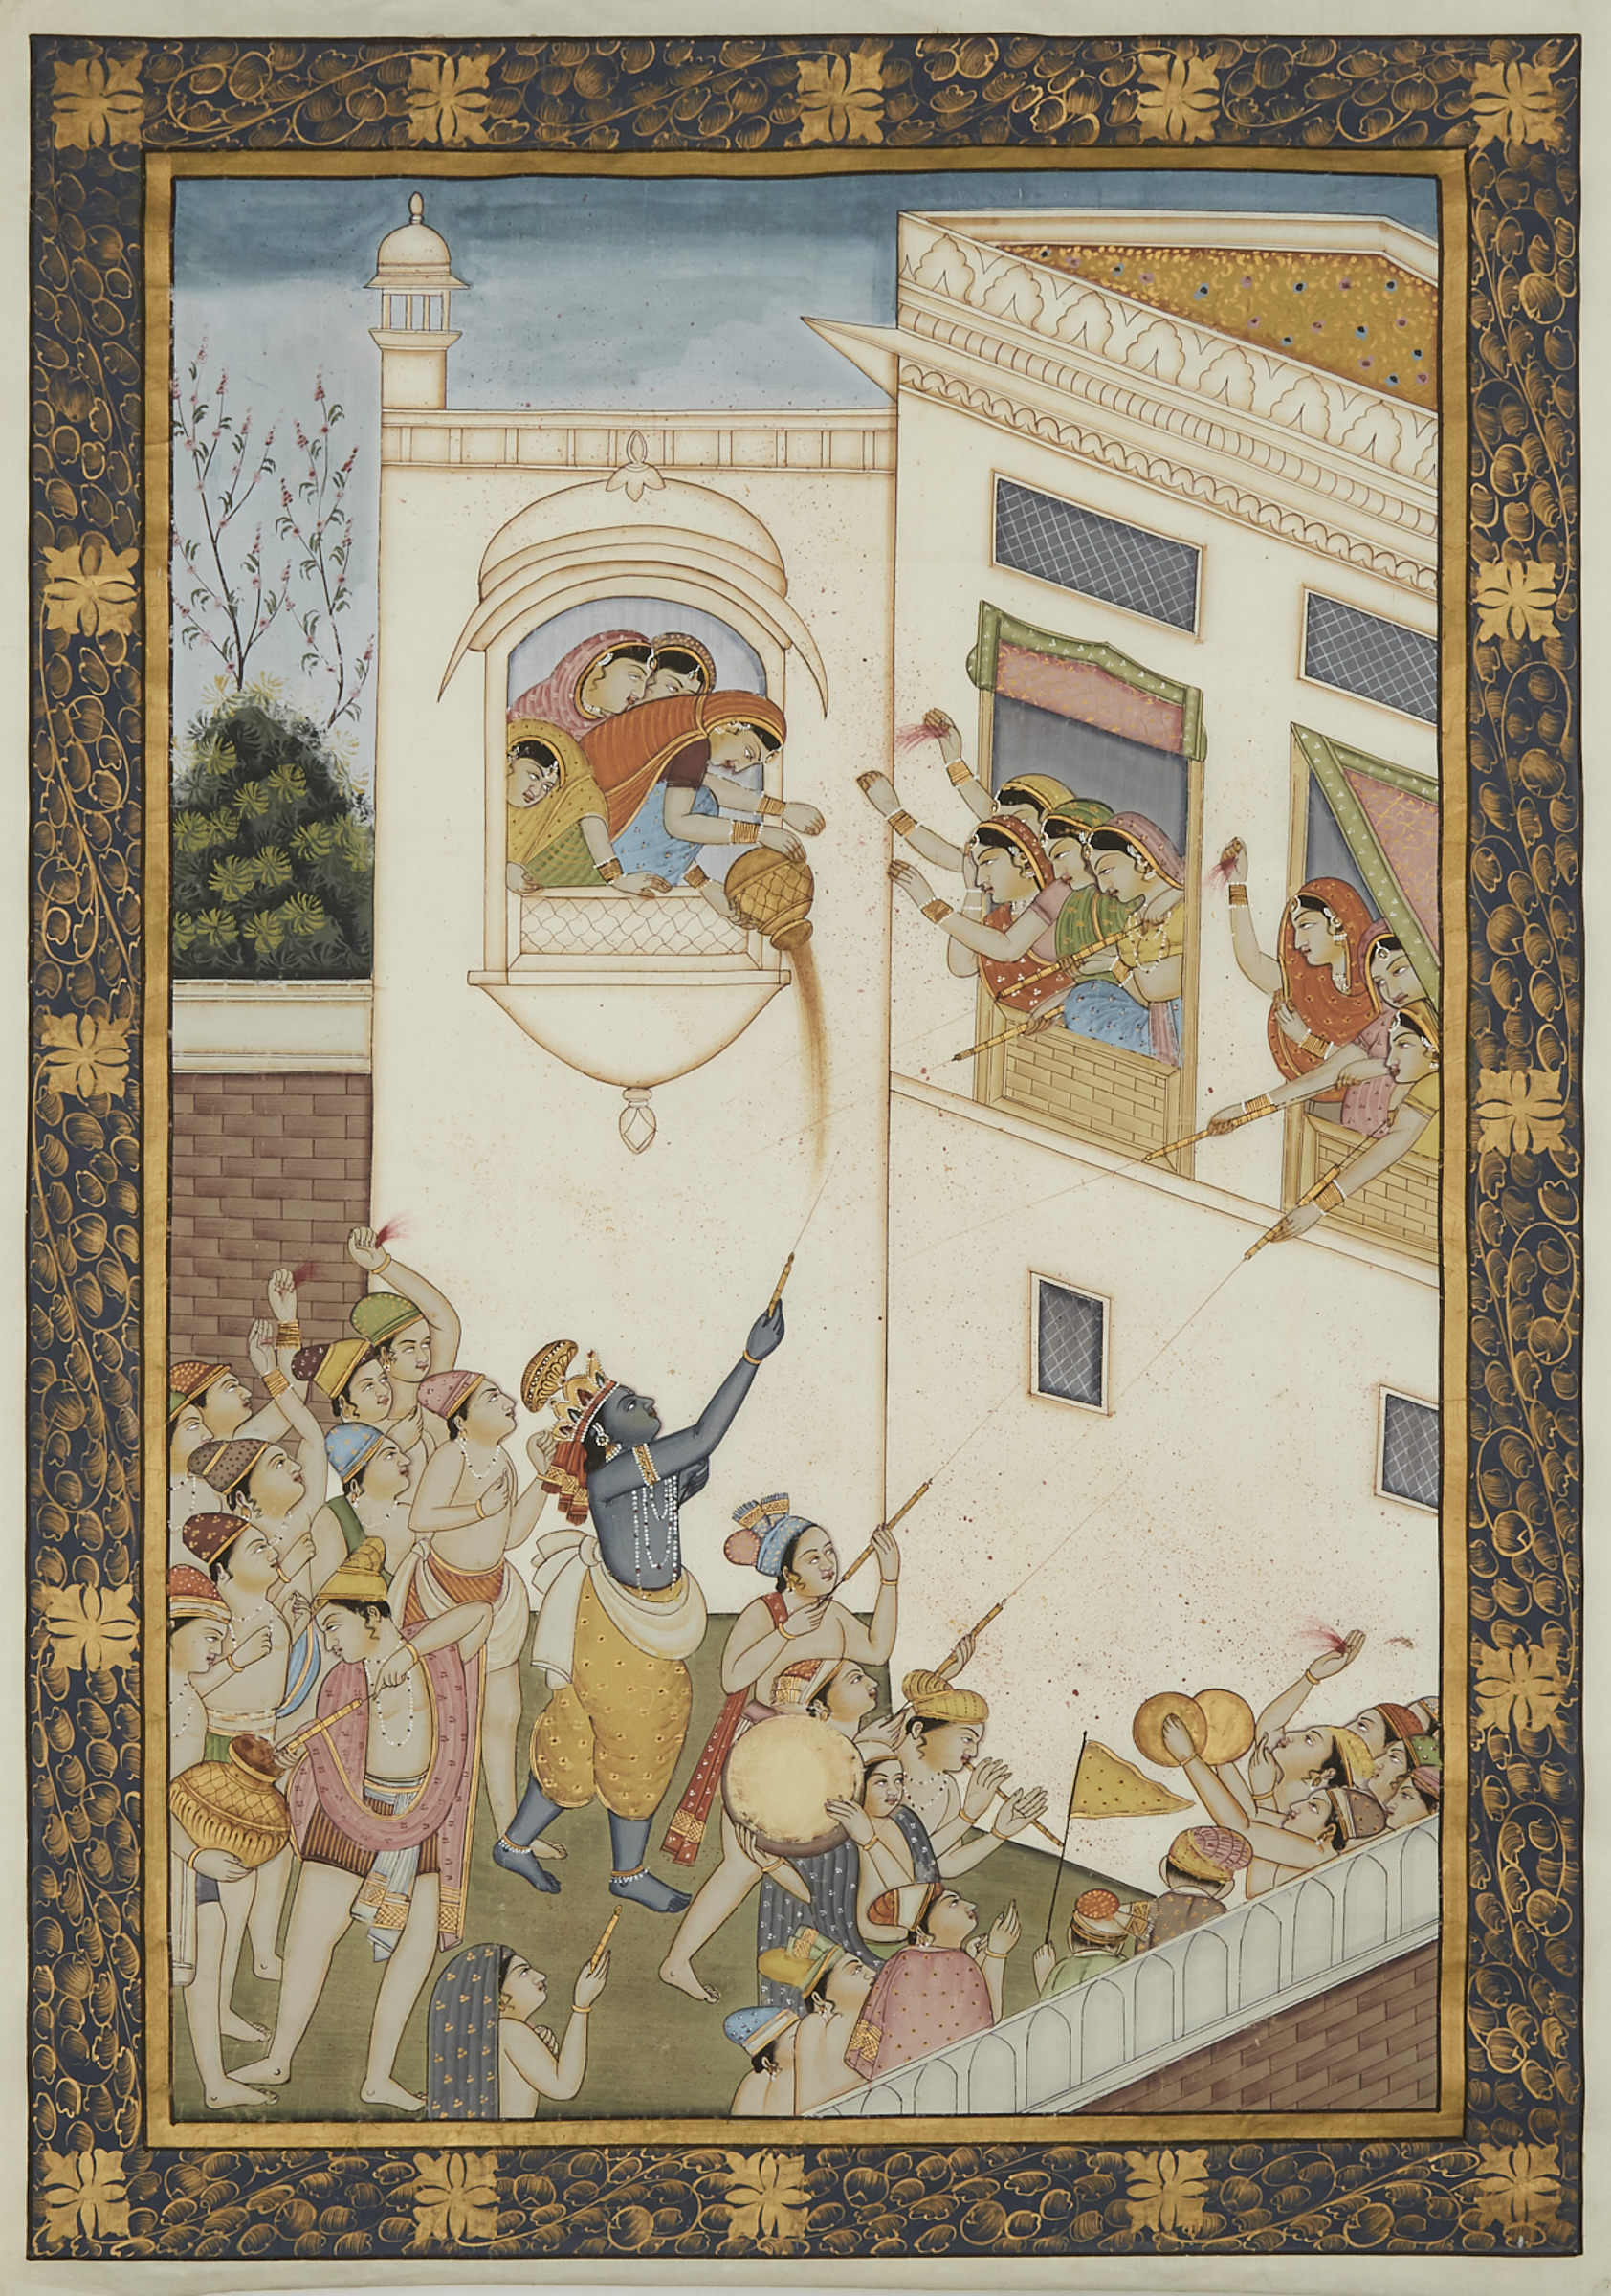 A Silk Painting depicting a Balcony Scene with Krishna